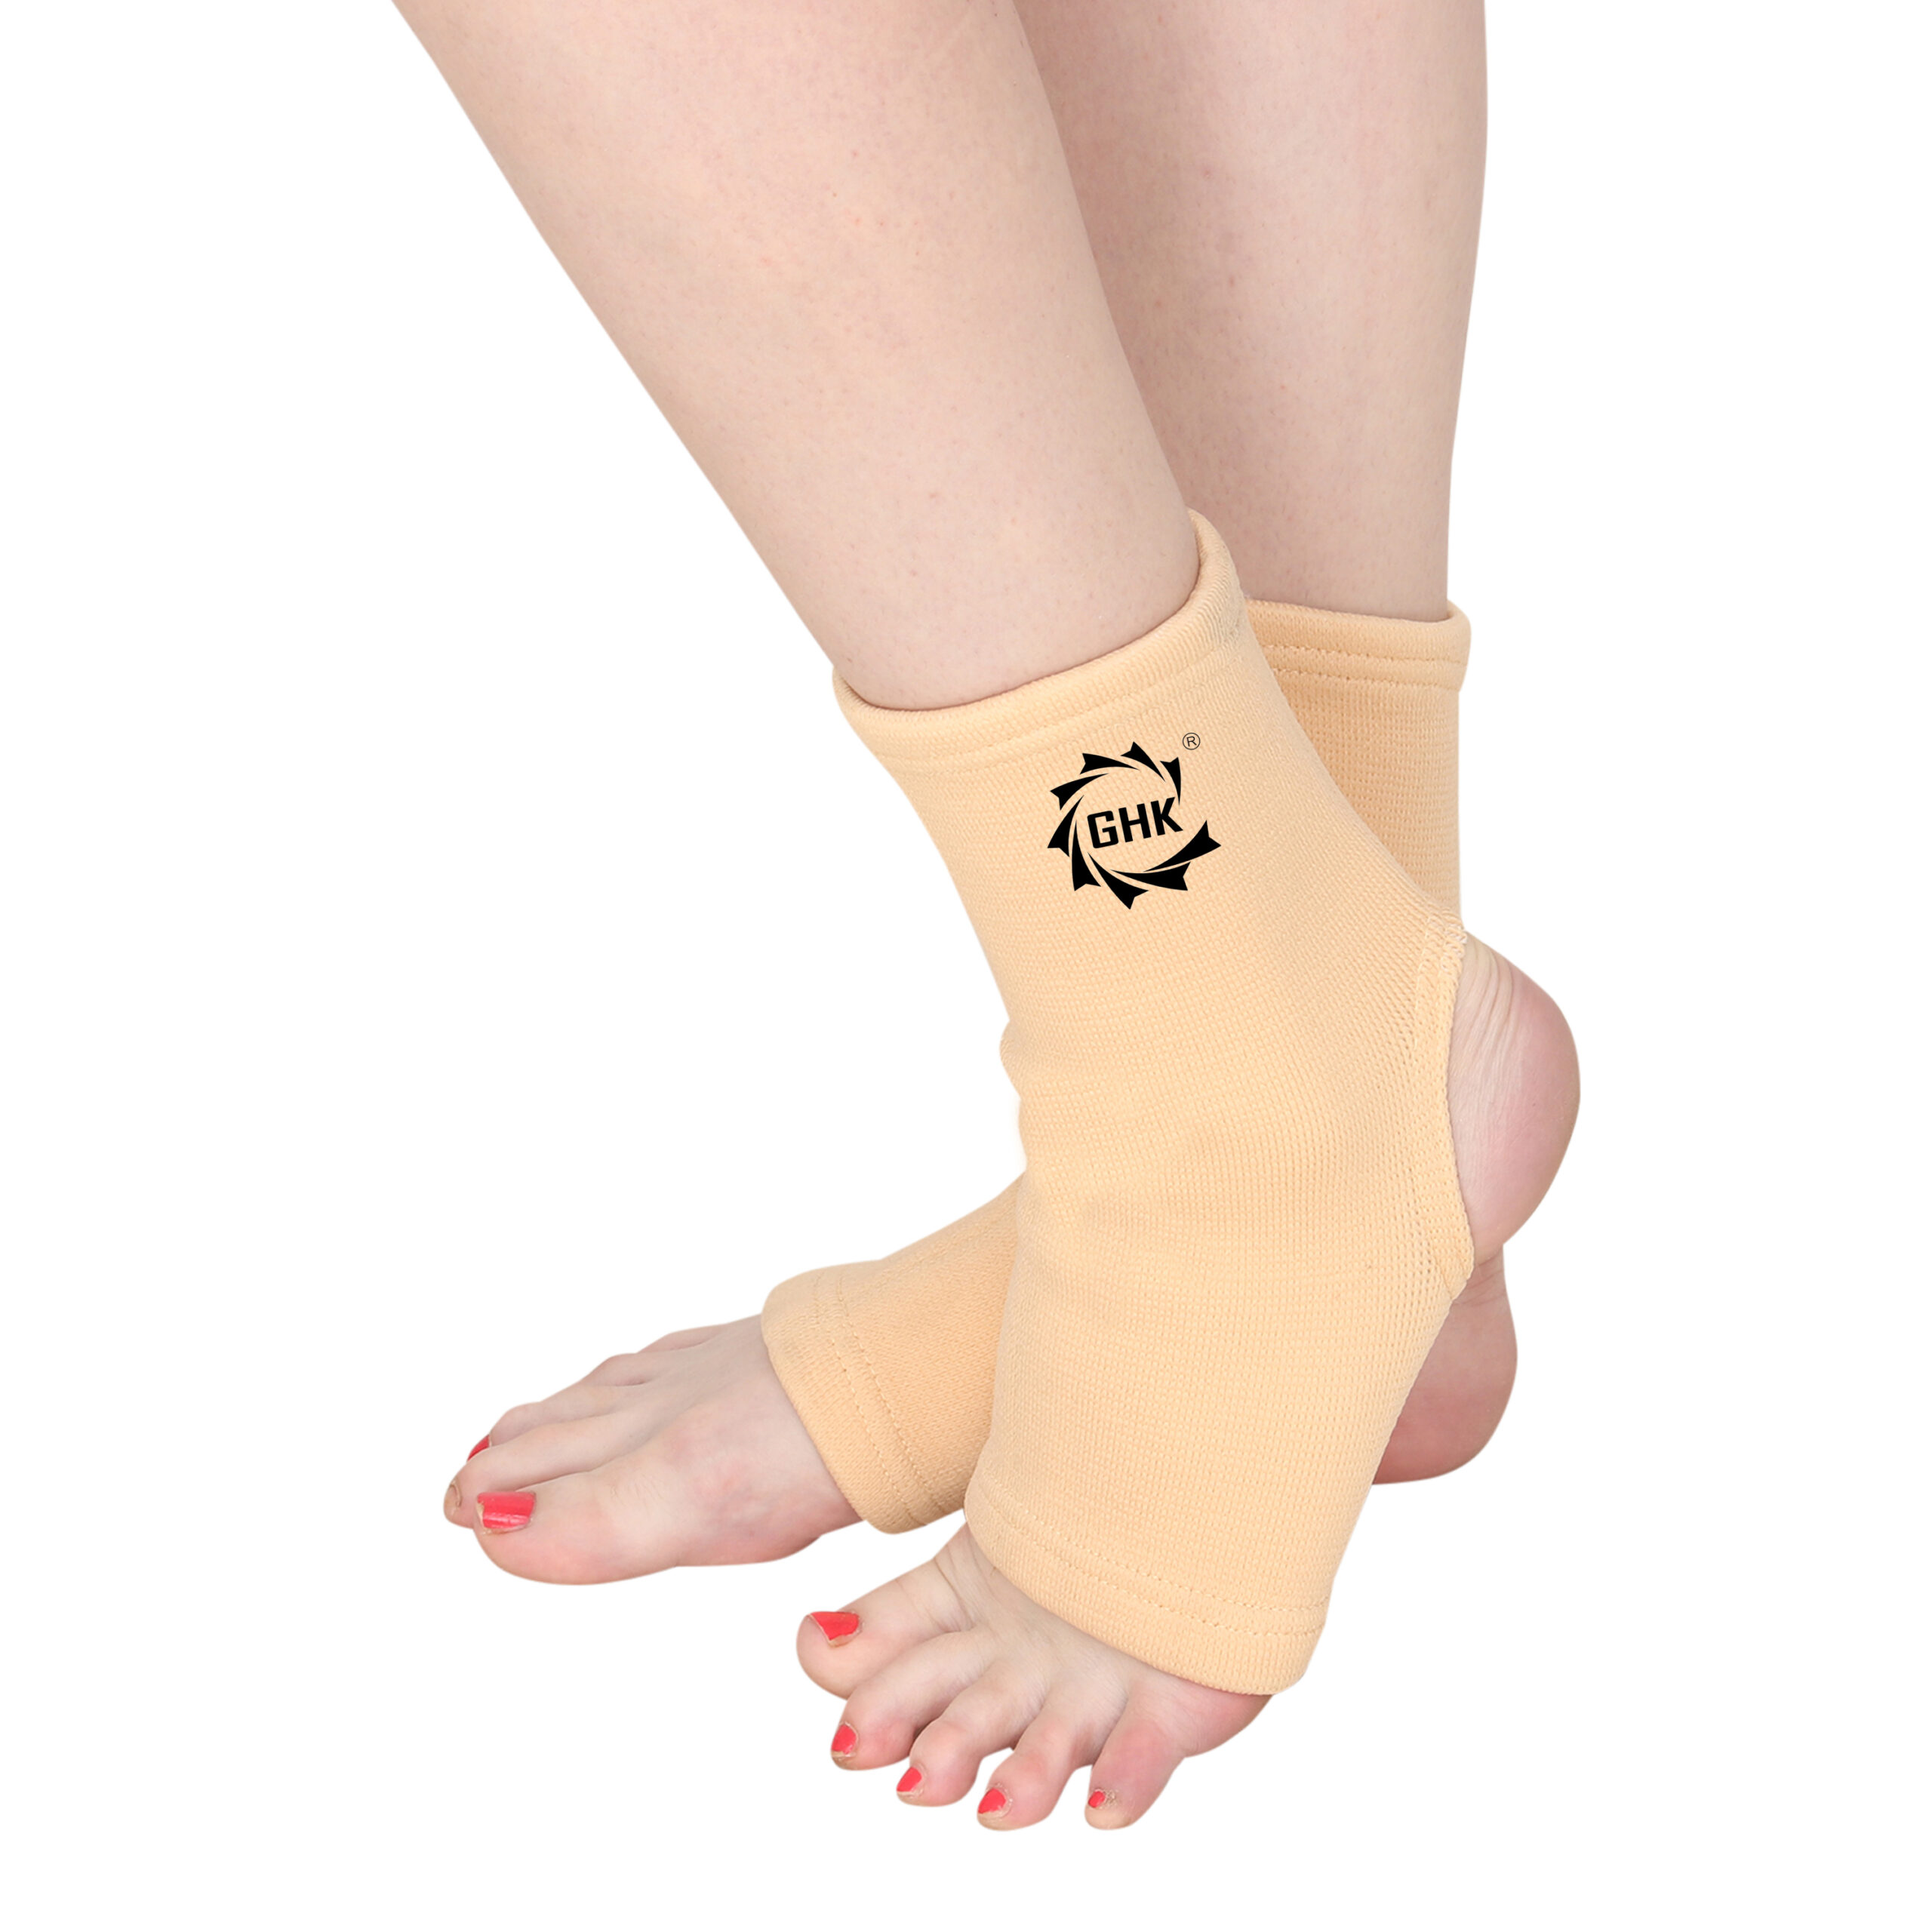 GHK S1 Ankle Support Stretchable & Flexible for Pain Relief in Sprains & Injuries (Unisex,Skin Colour)